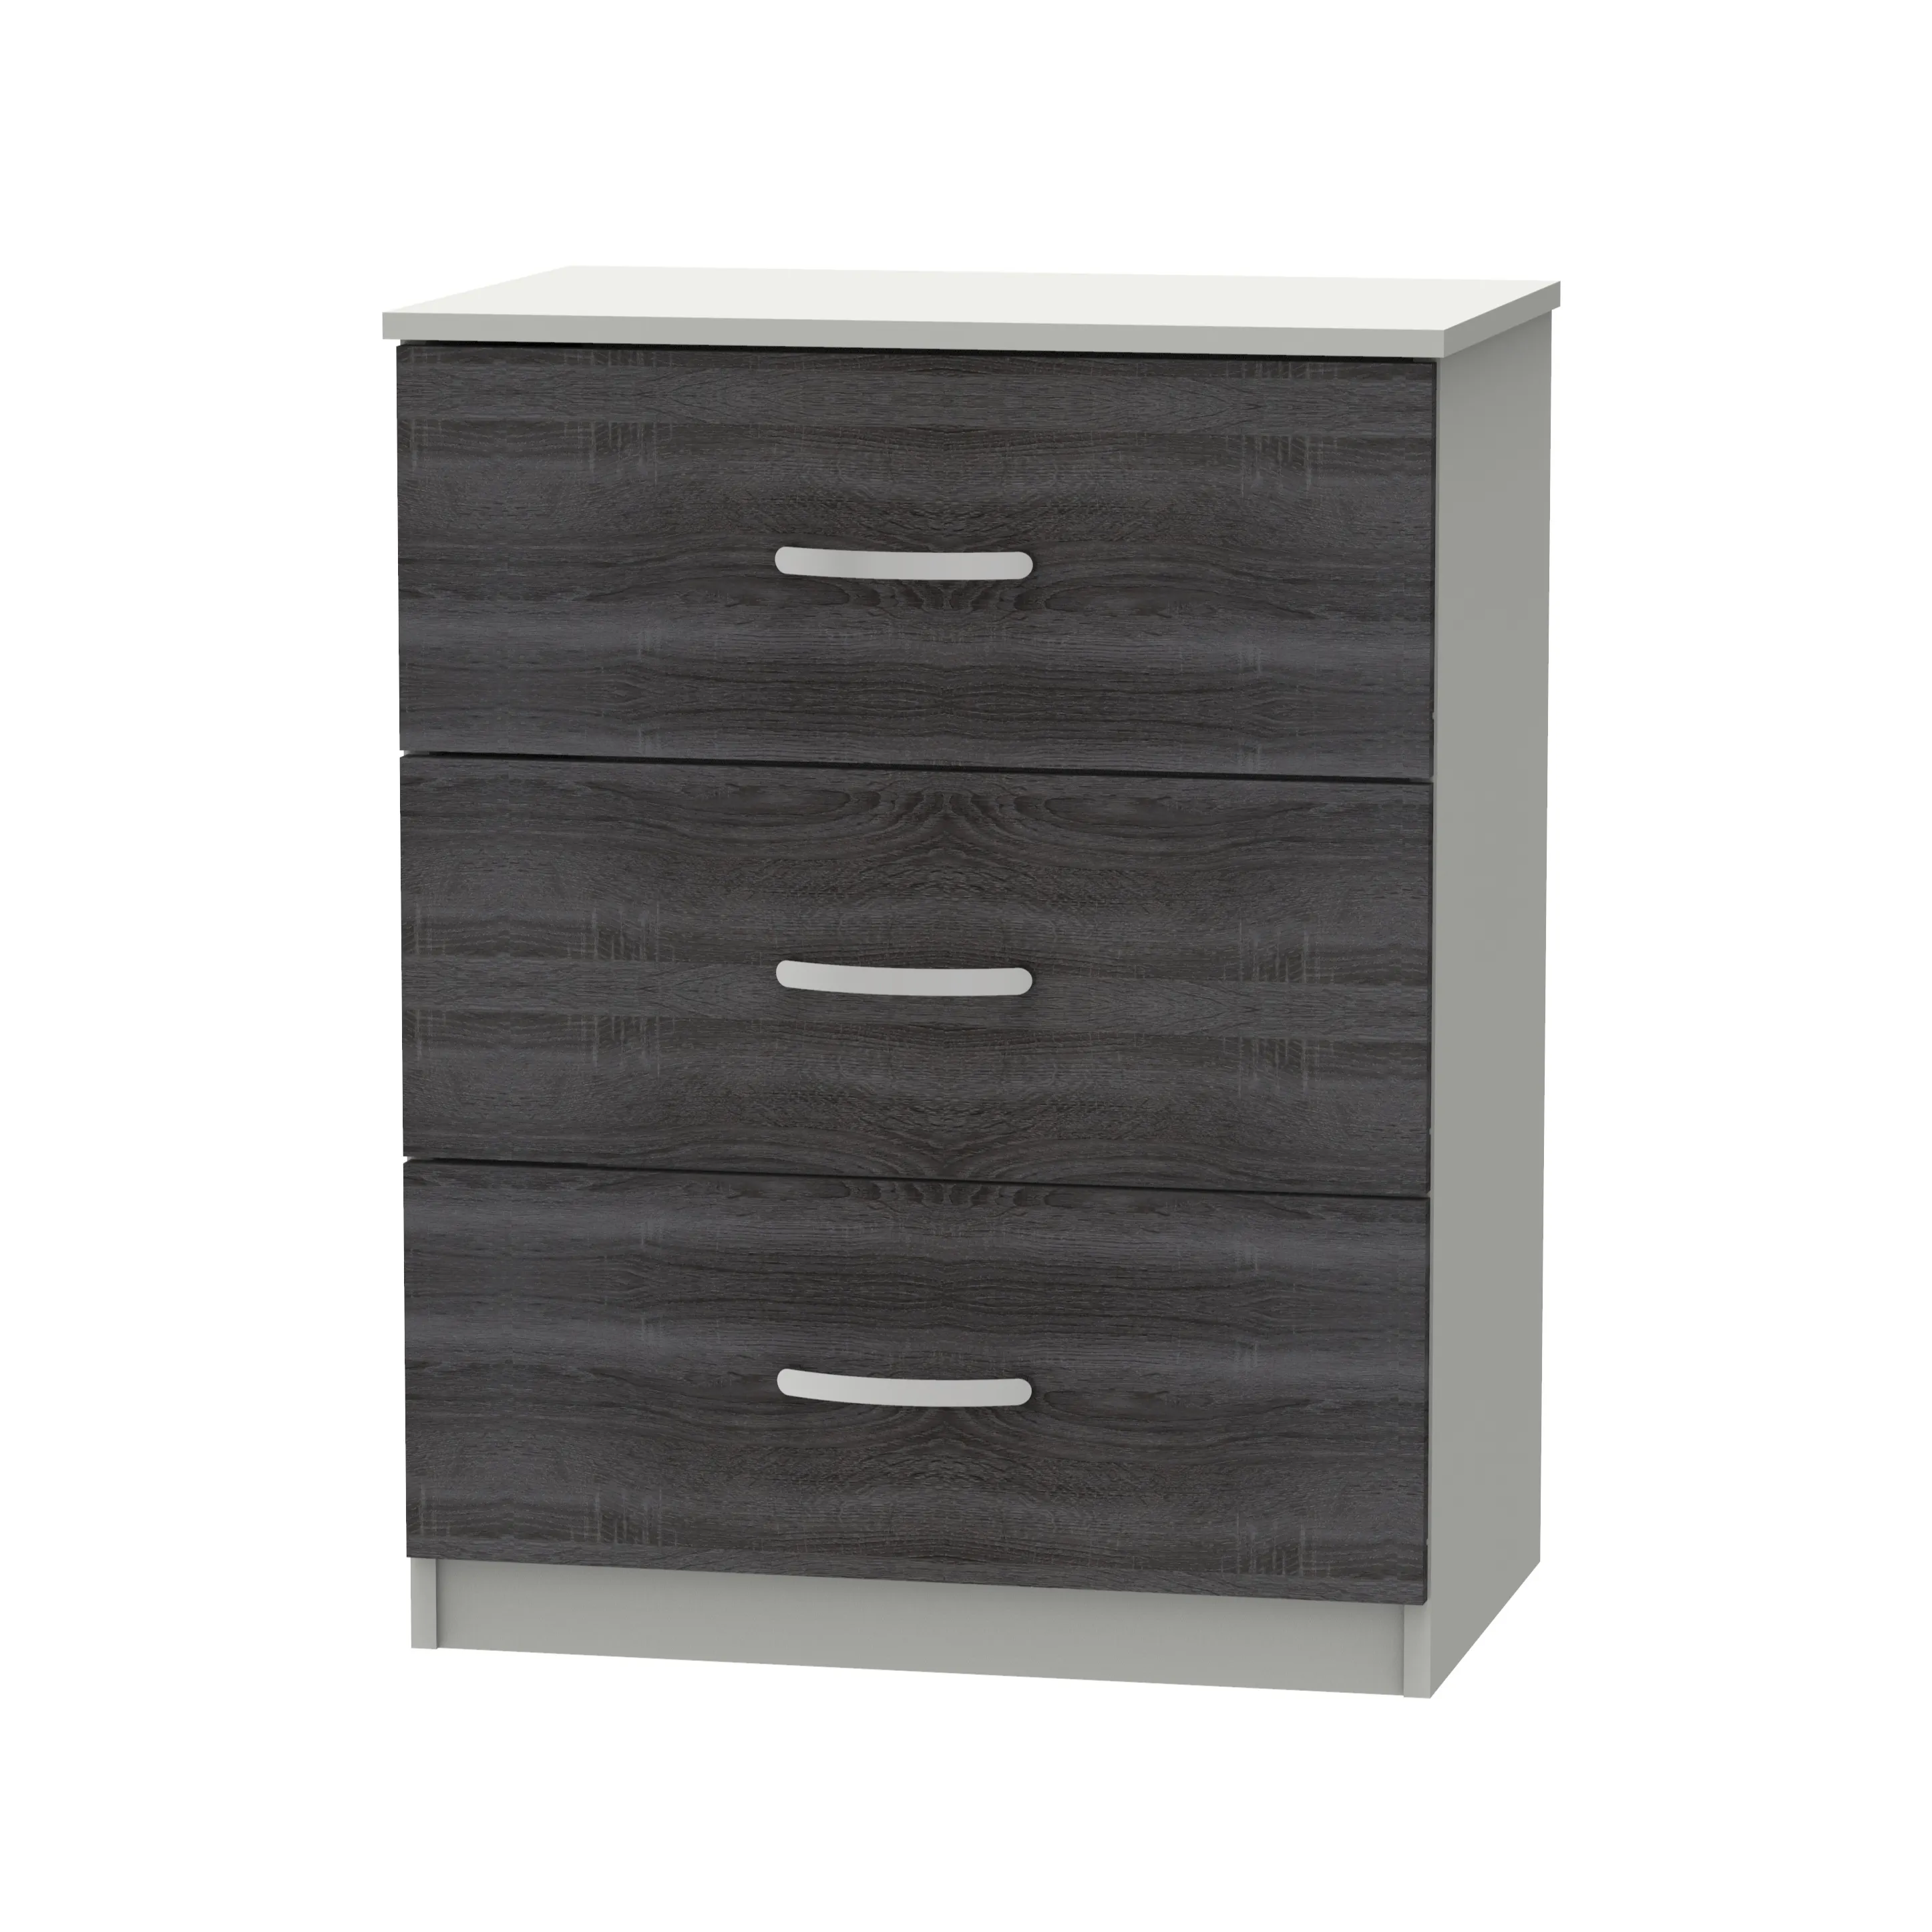 3 Drawer Chest of Drawer for Bedroom Living Room Office Furniture Set Customized Made in Malaysia 1407